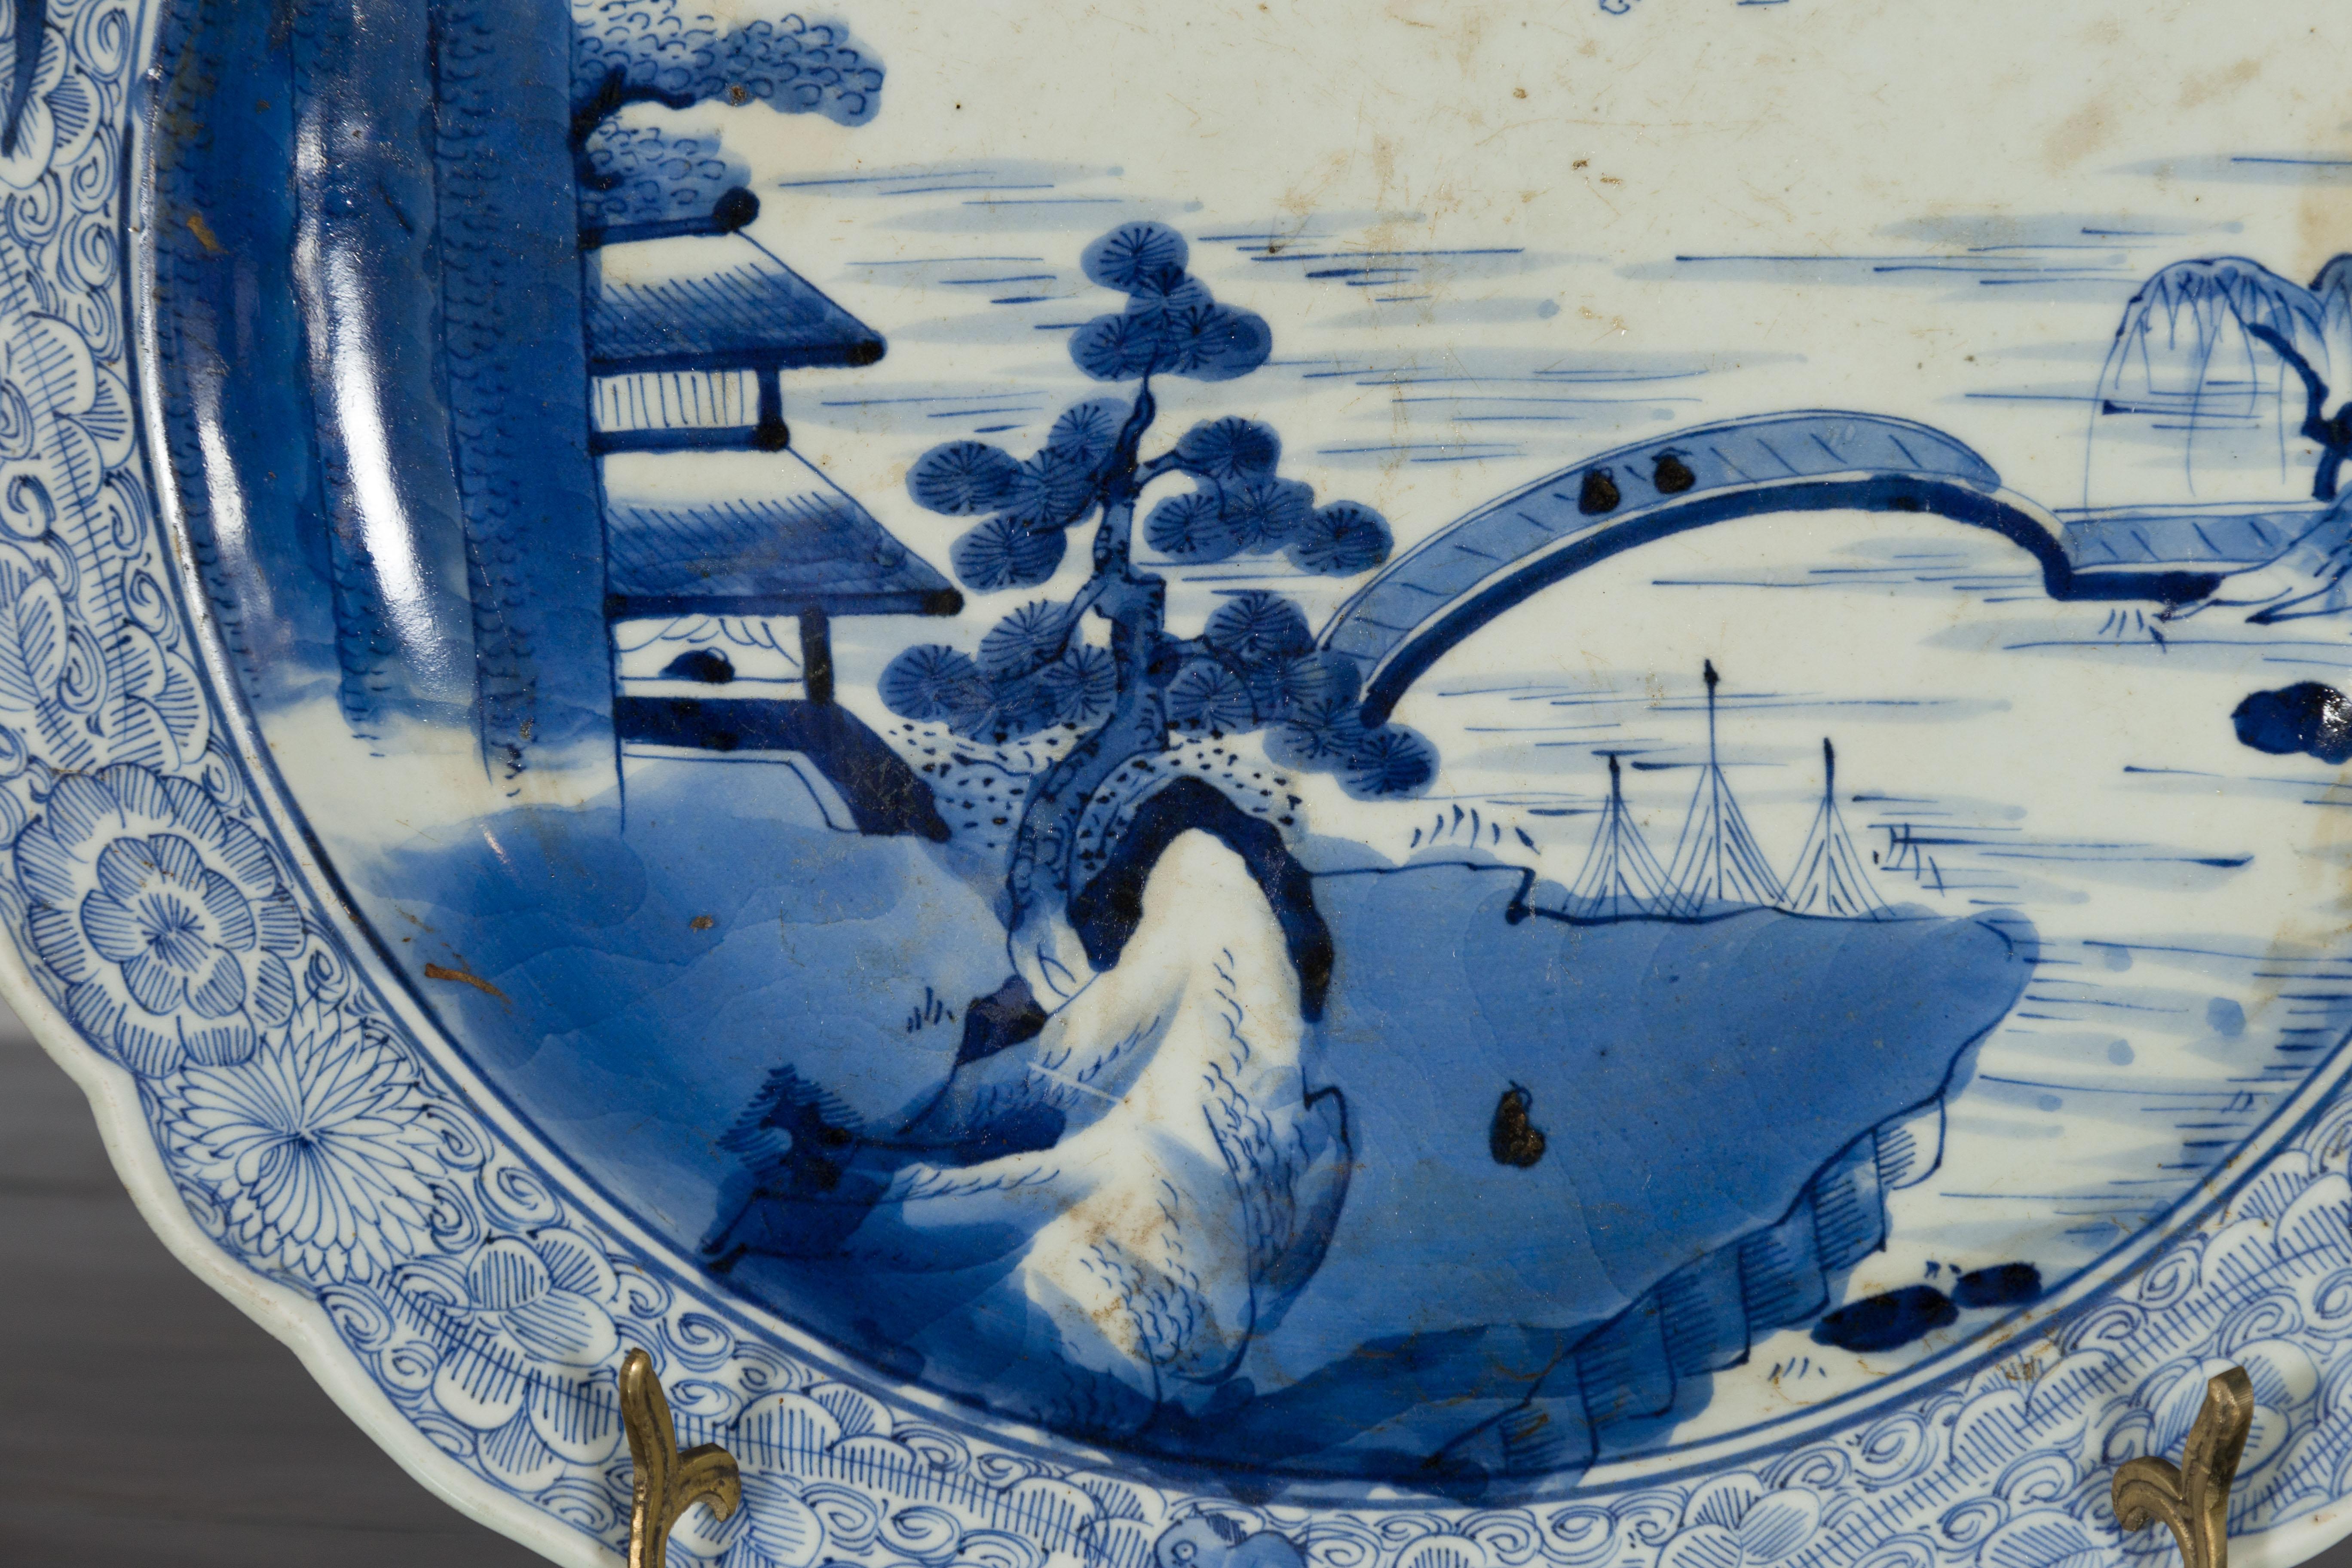 19th Century Japanese Porcelain Imari Plate with Painted Blue and White Décor For Sale 10